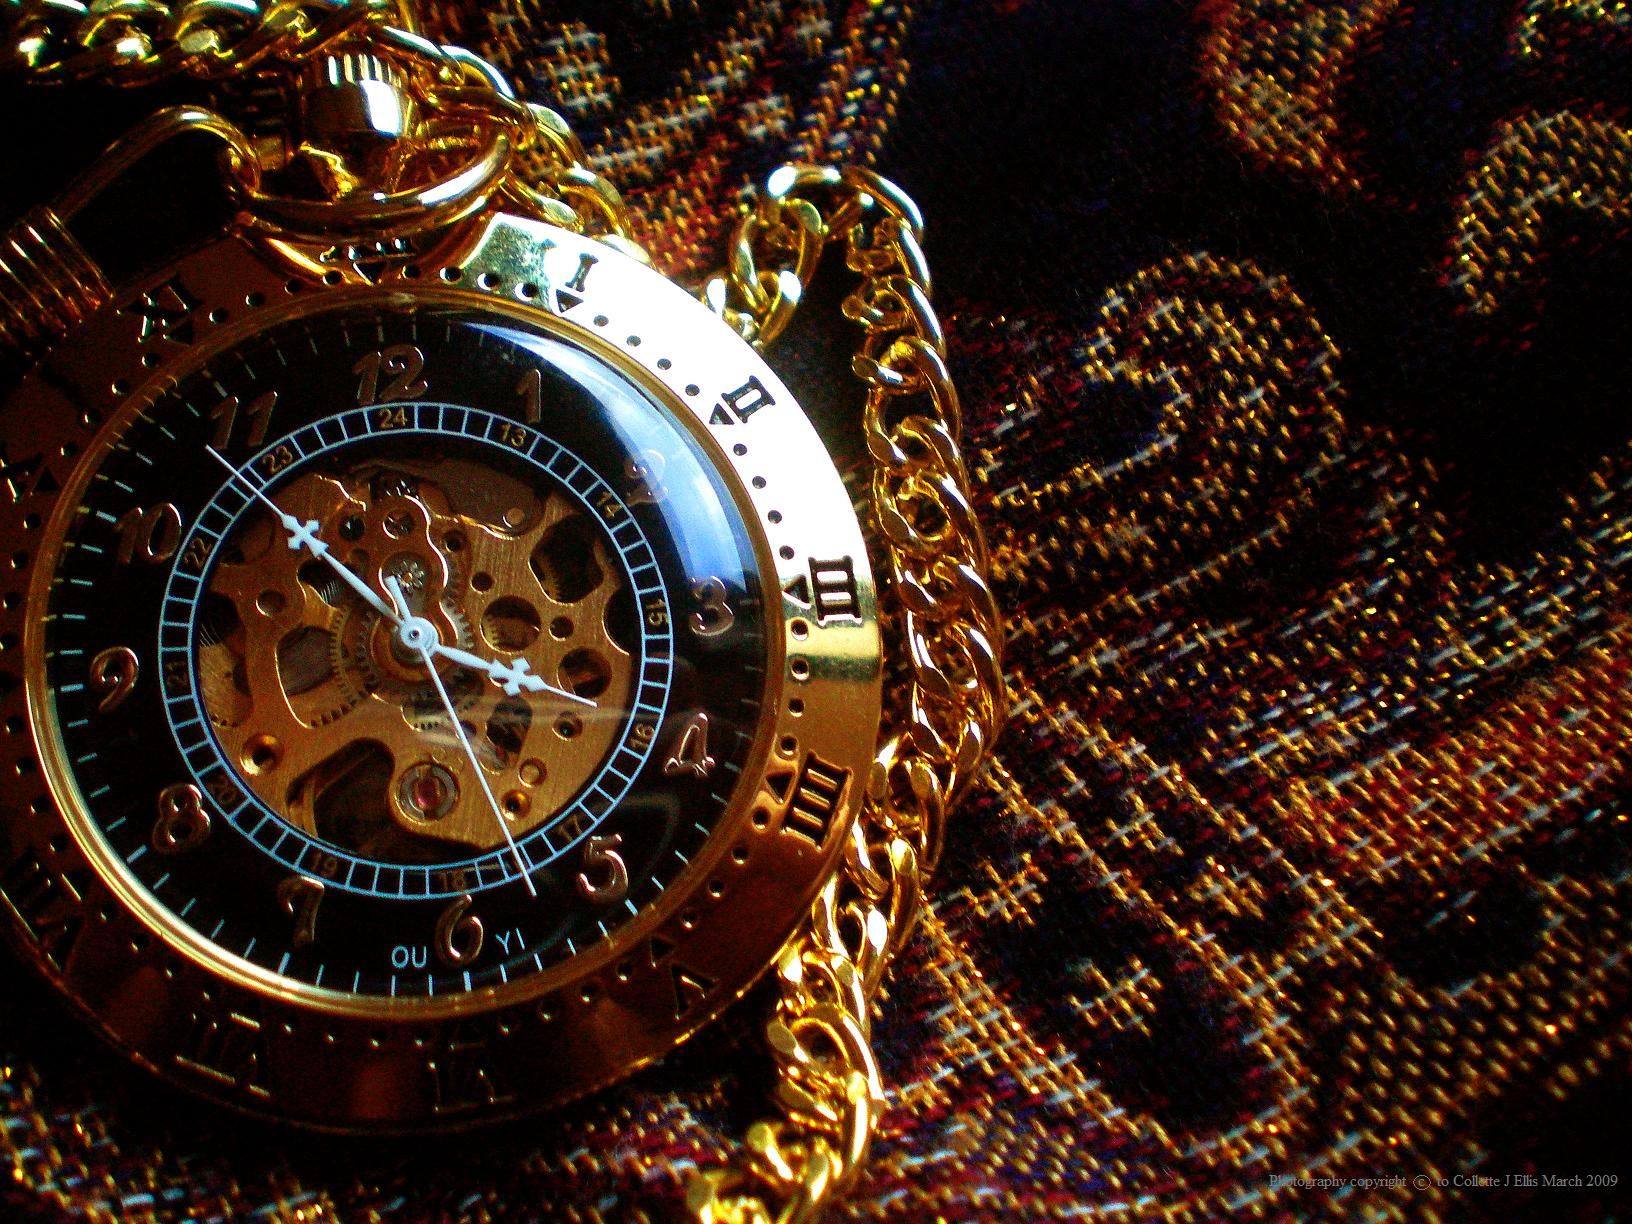 A gold watch with a chain on a plaid background. - Steampunk